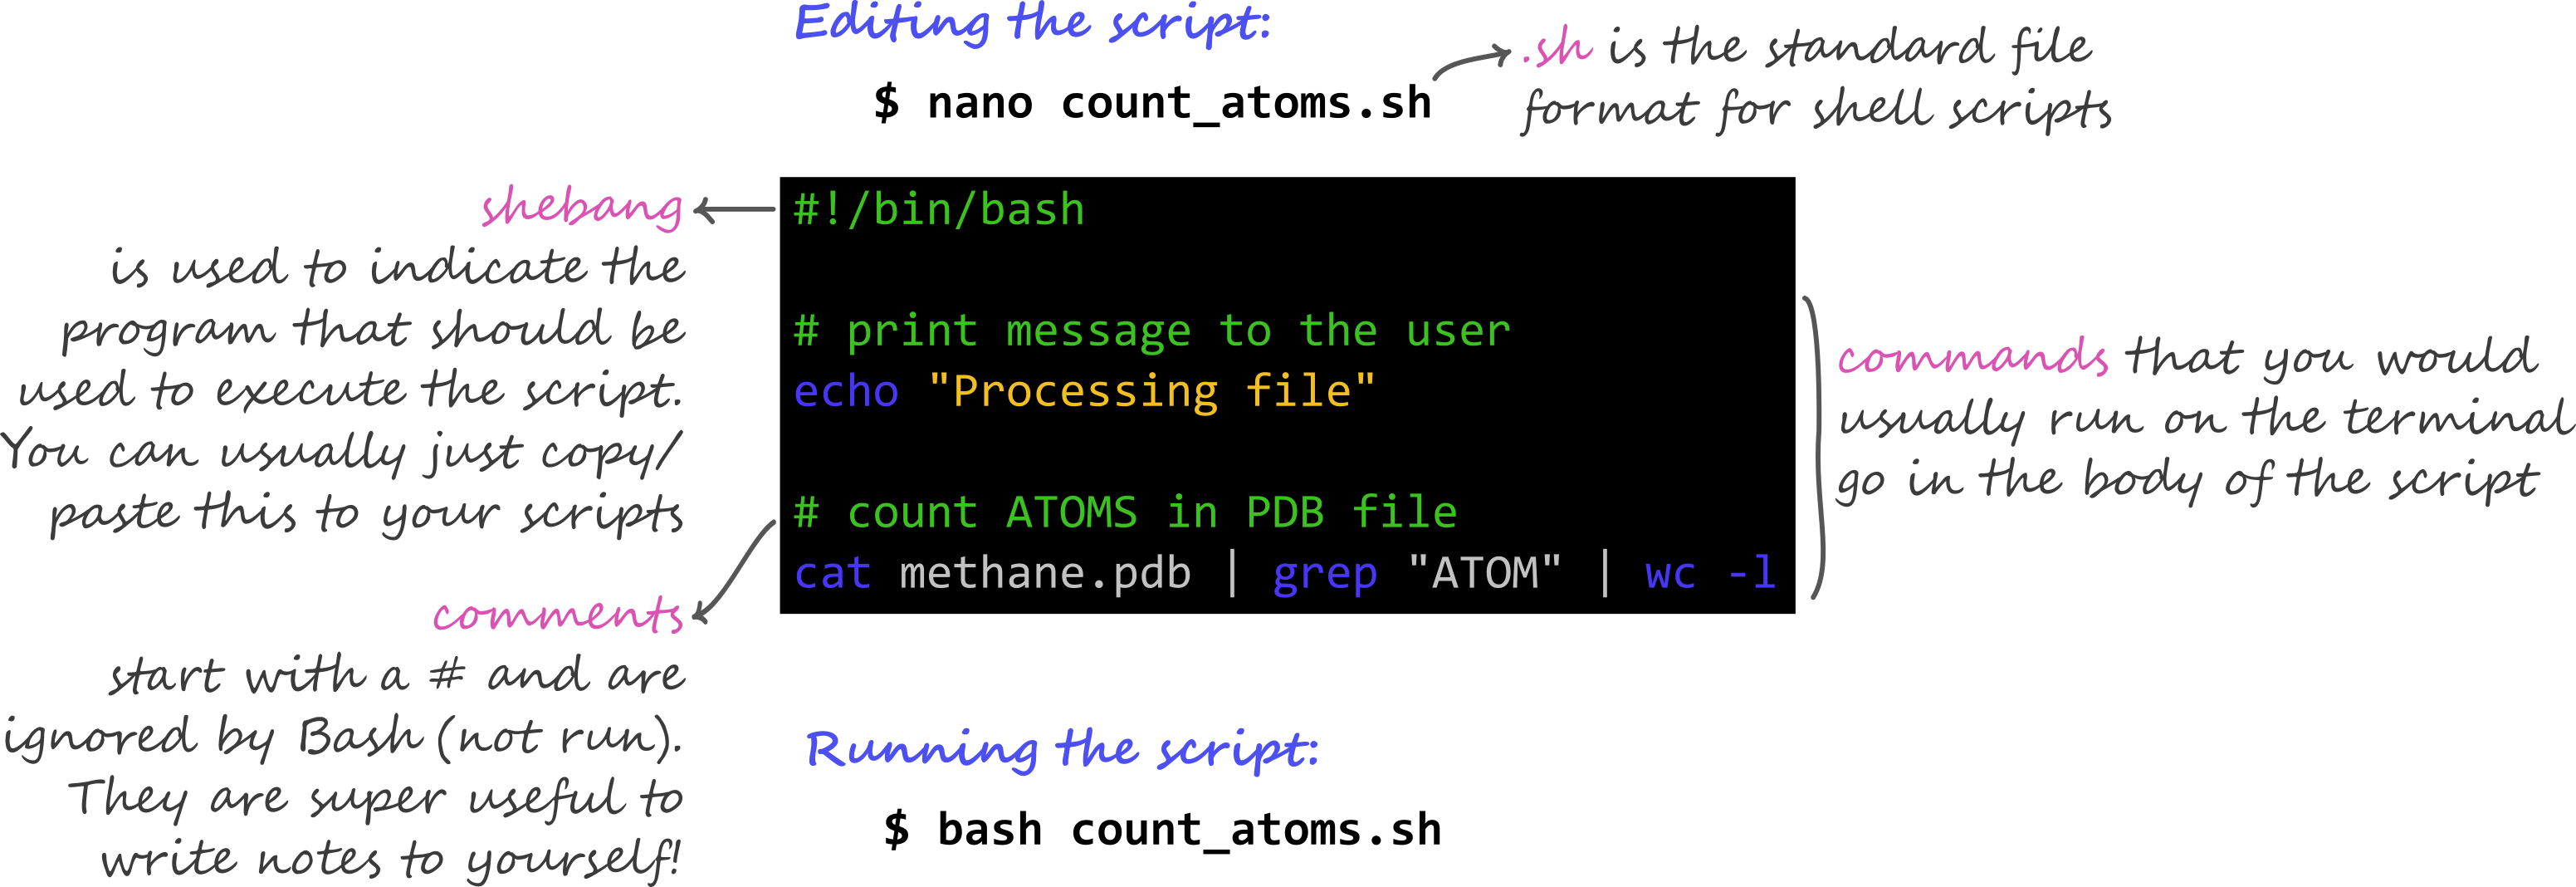 Diagram summarising how a shell script is organised, including the shebang, comments and code.